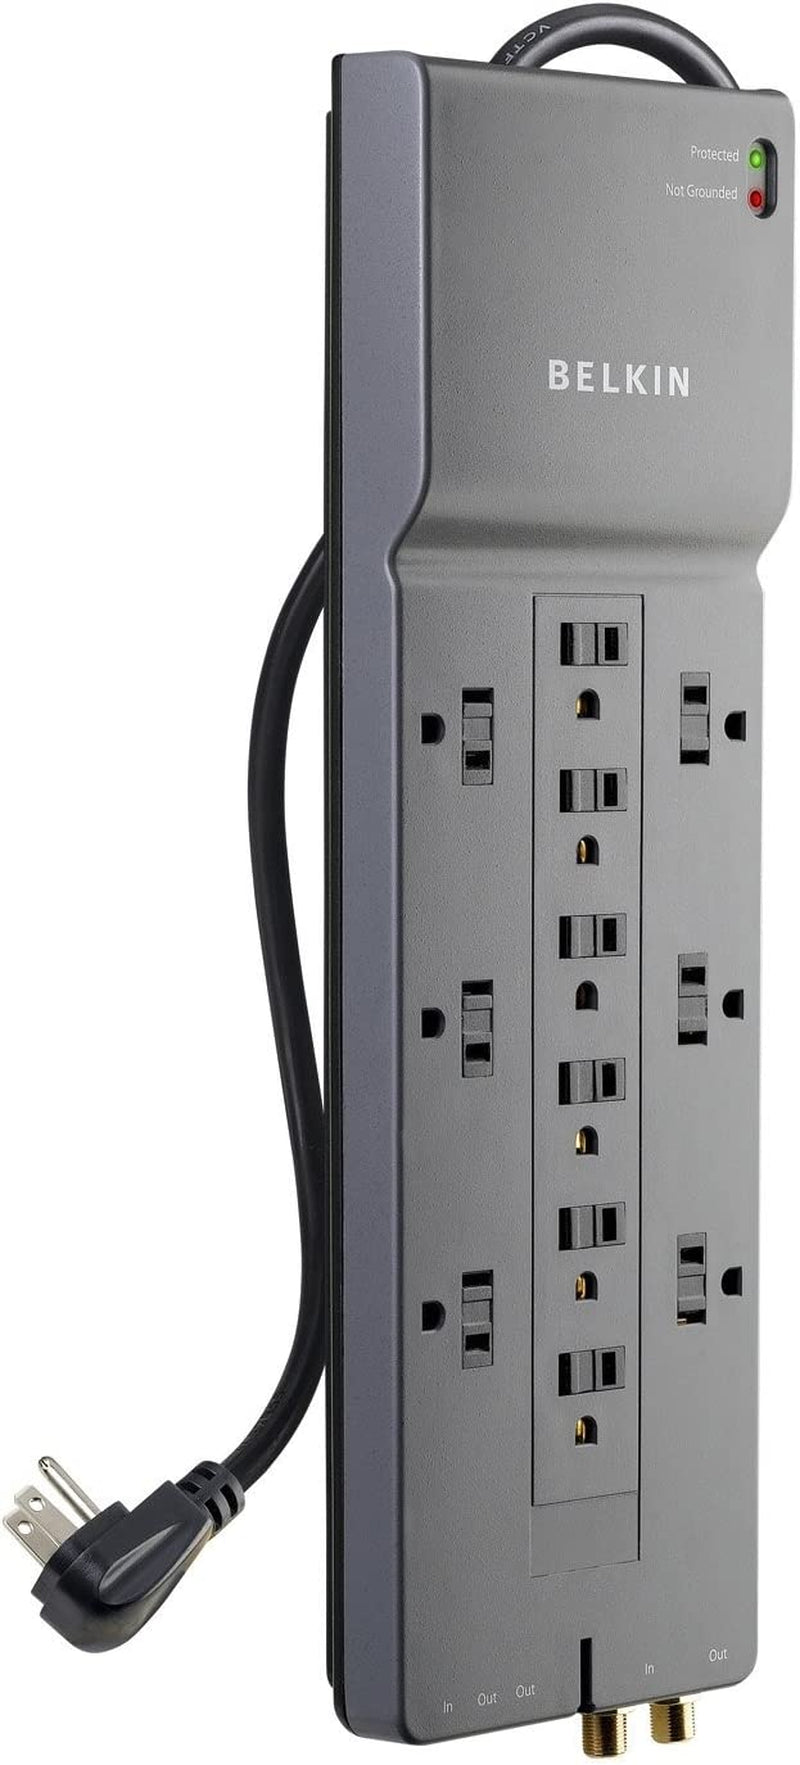 Belkin Power Strip Surge Protector - 12 AC Multiple Outlets & 8 Ft Long Flat Plug Heavy Duty Extension Cord for Home, Office, Travel, Computer Desktop, Laptop & Phone Charging Brick (3,940 Joules)